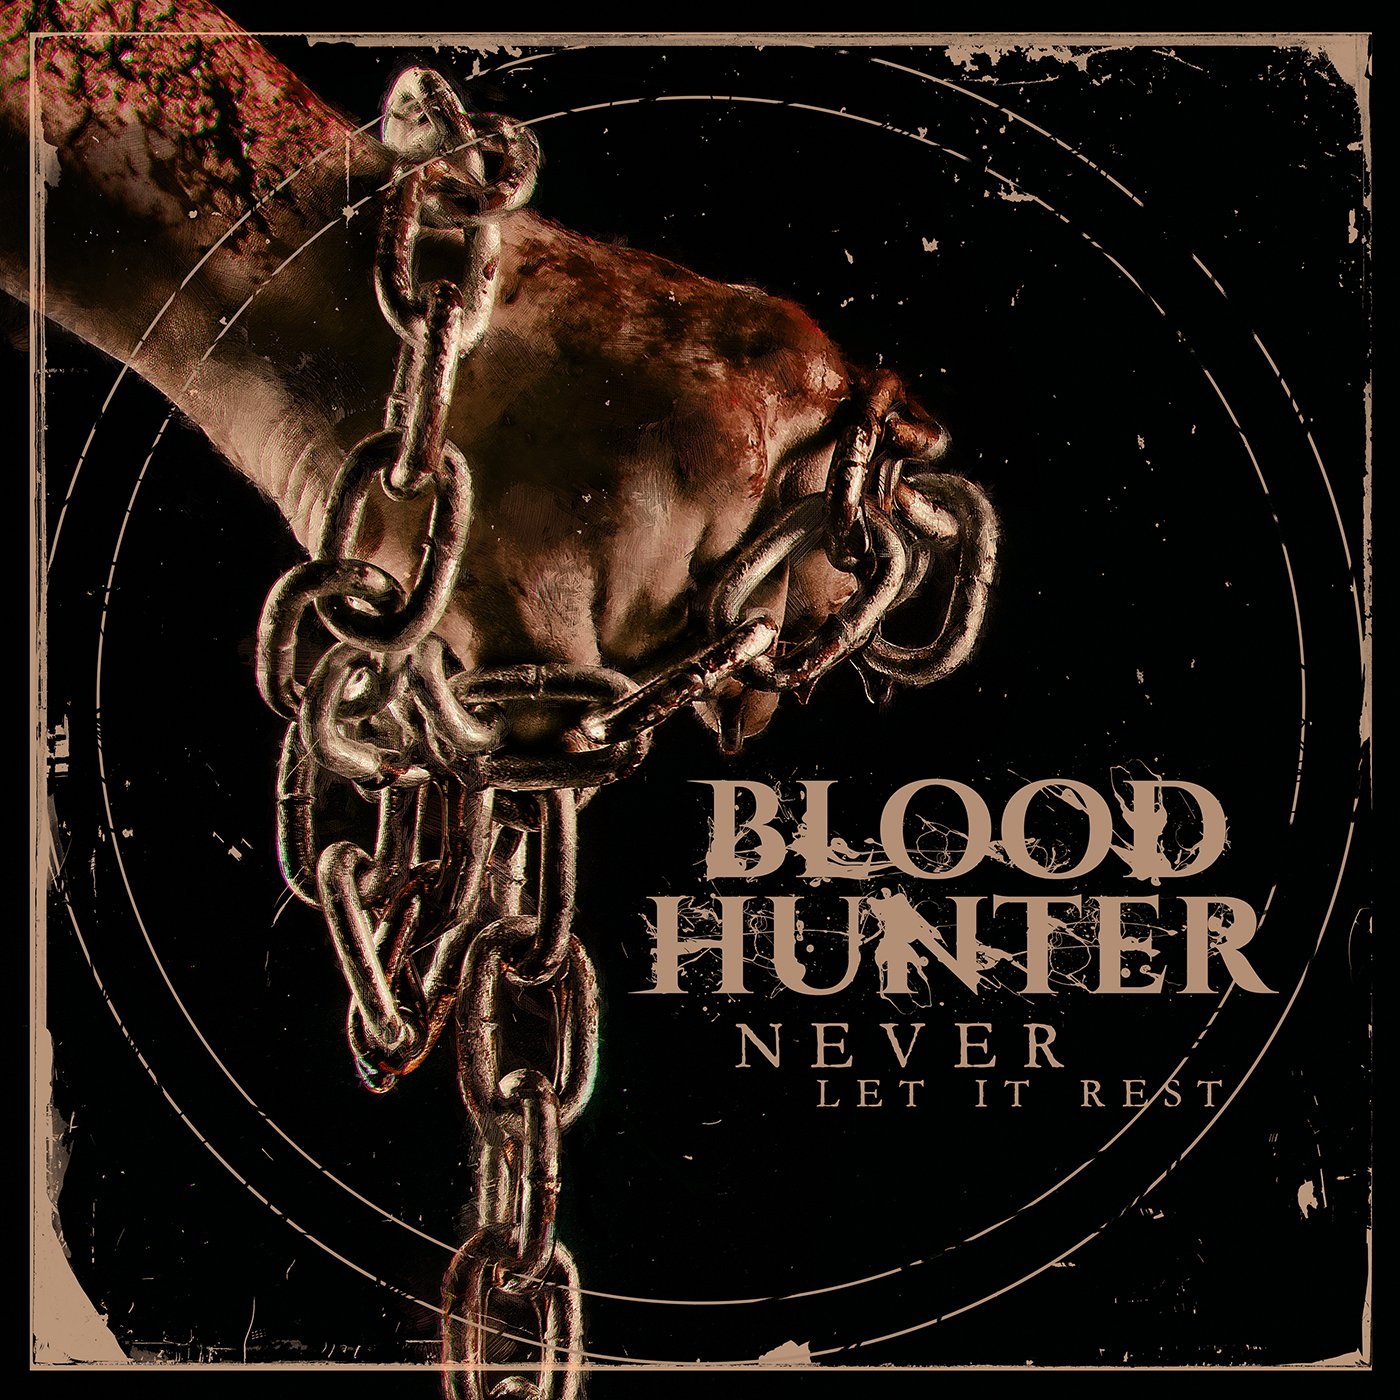 BLOODHUNTER “NEVER LET IT REST”